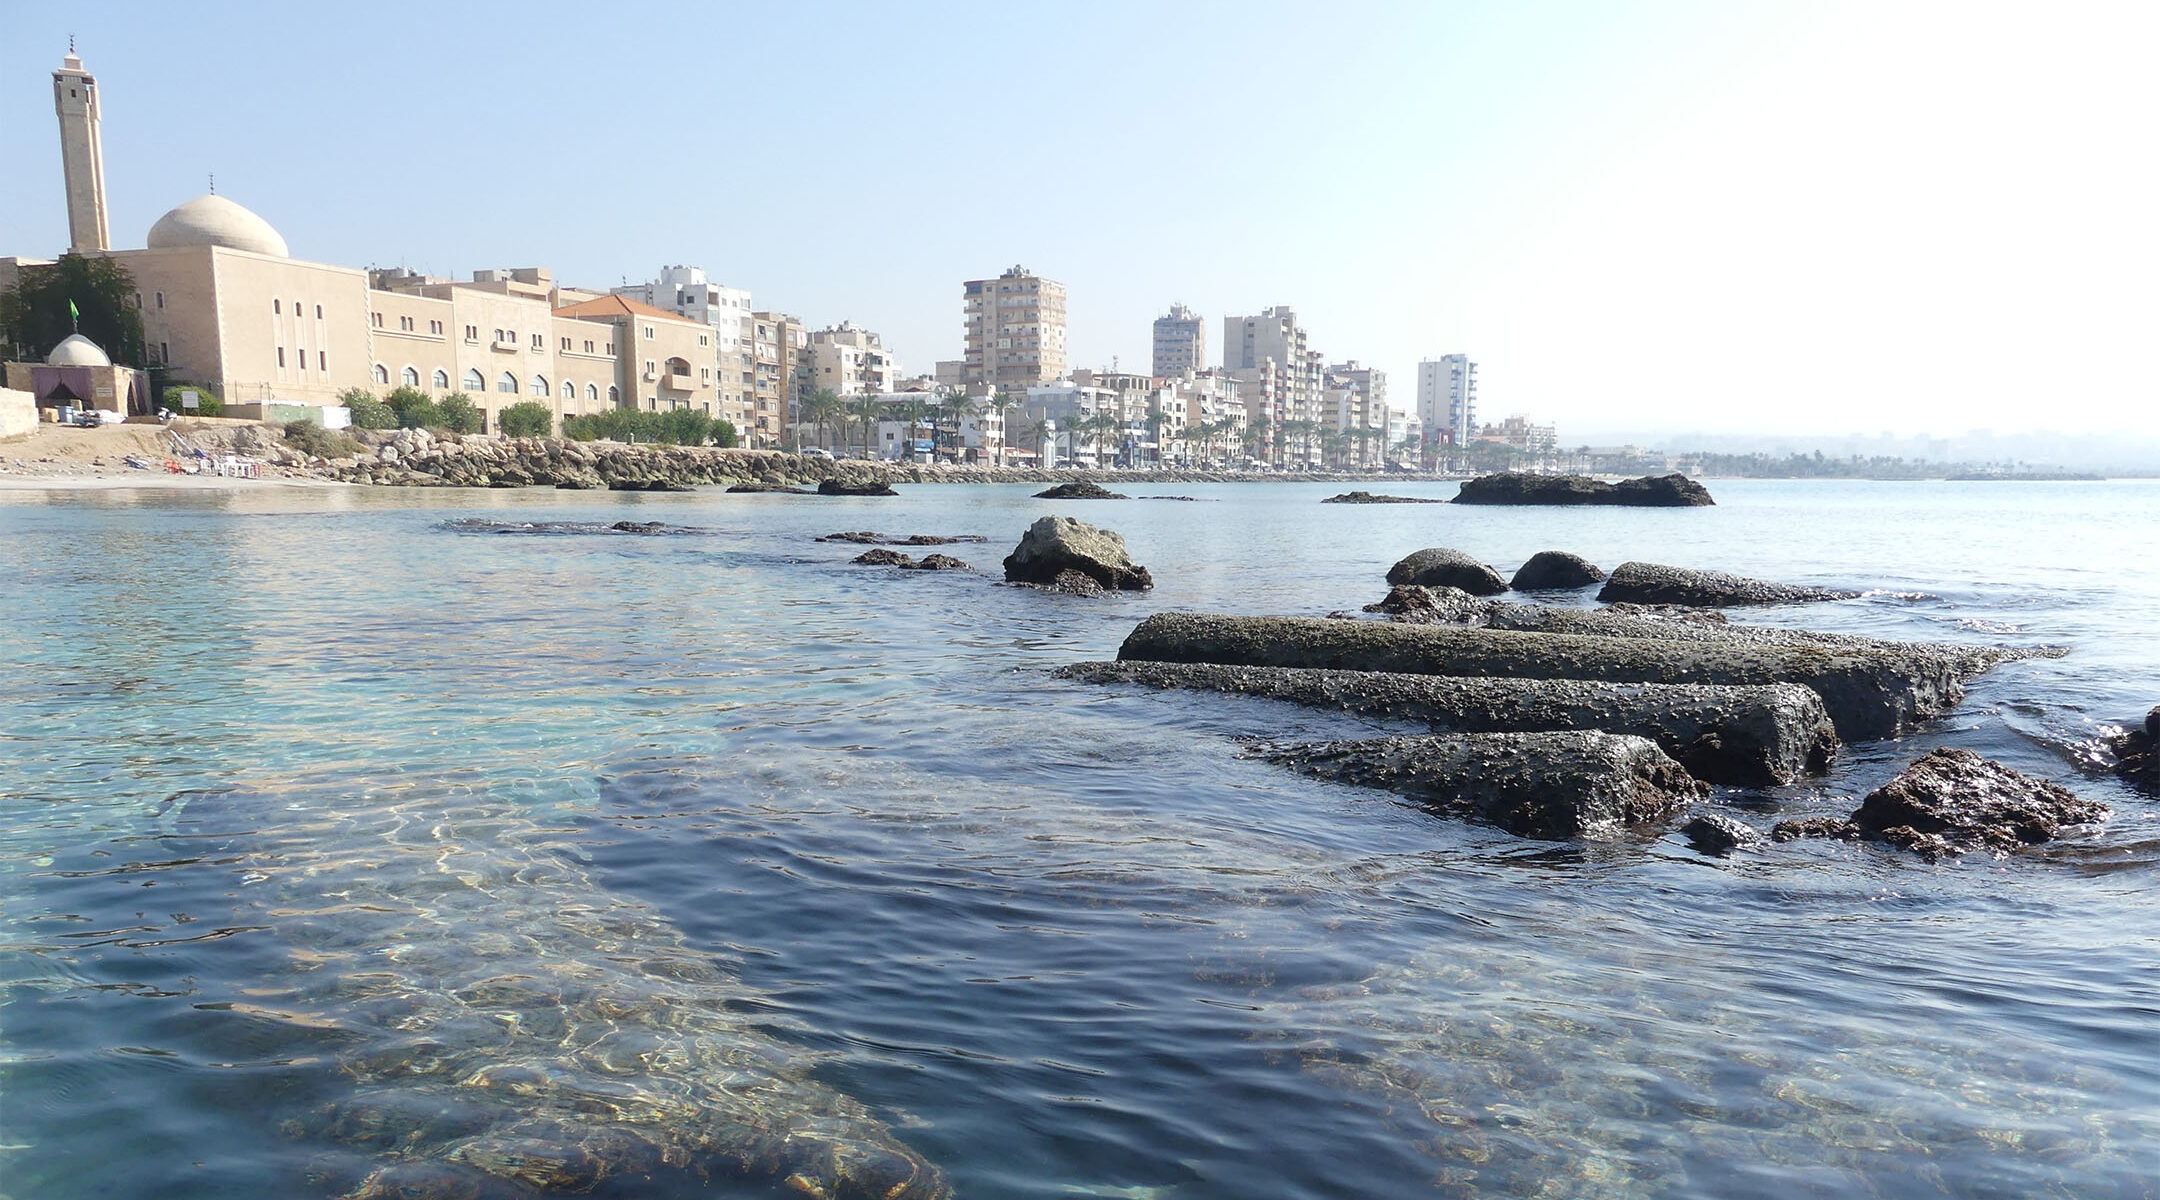 The city of Tyre in southern Lebanon seen from its coastline. (Wikimedia Commons/Roman Deckert)